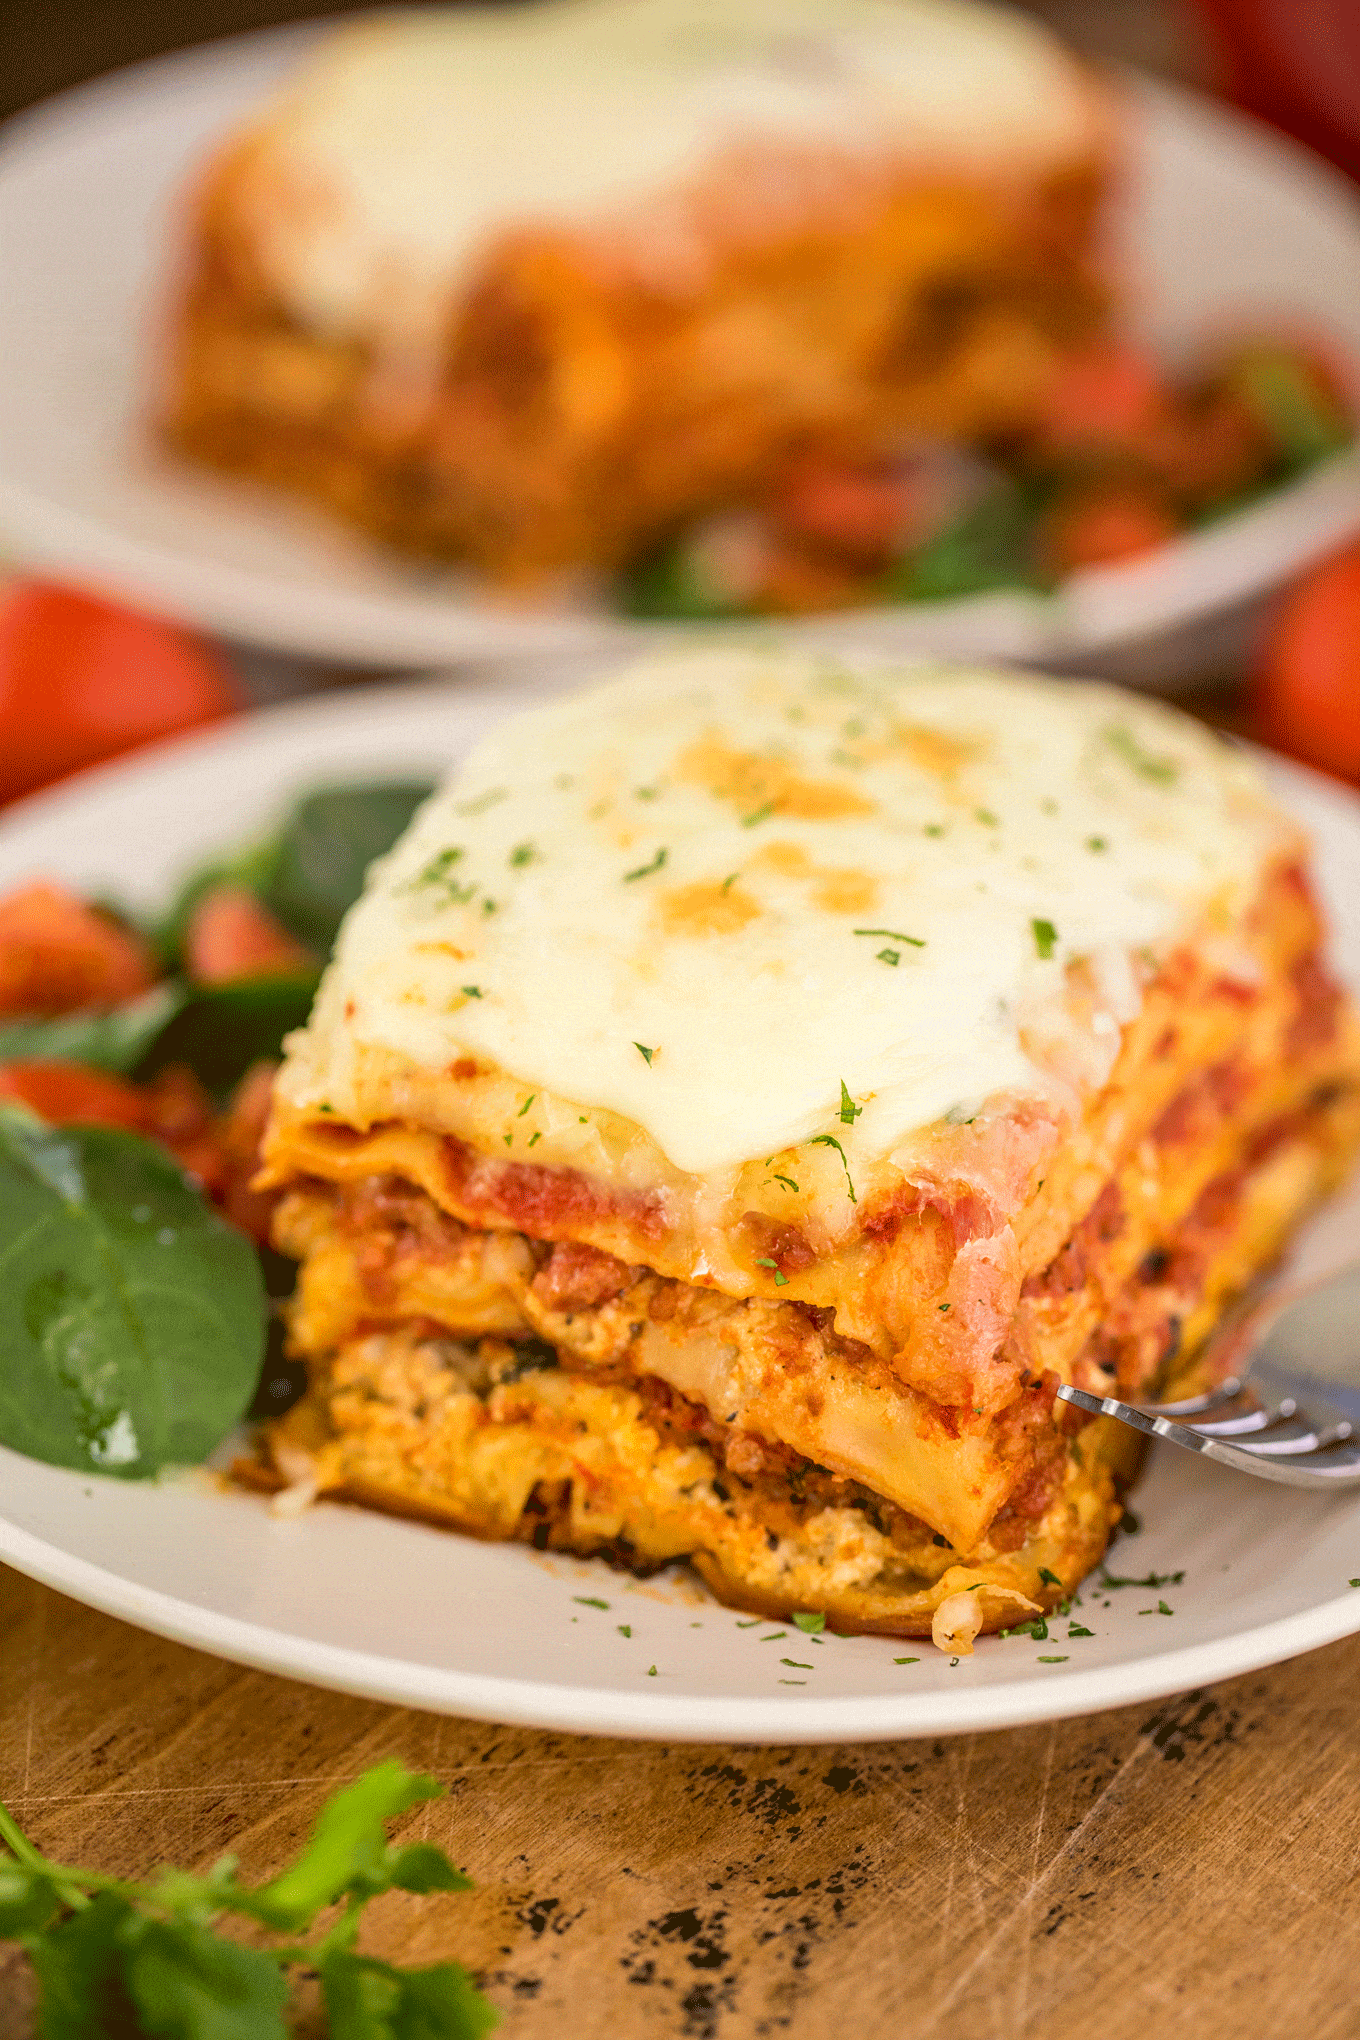 Easy Homemade Lasagna Recipe [Video] - Sweet and Savory Meals